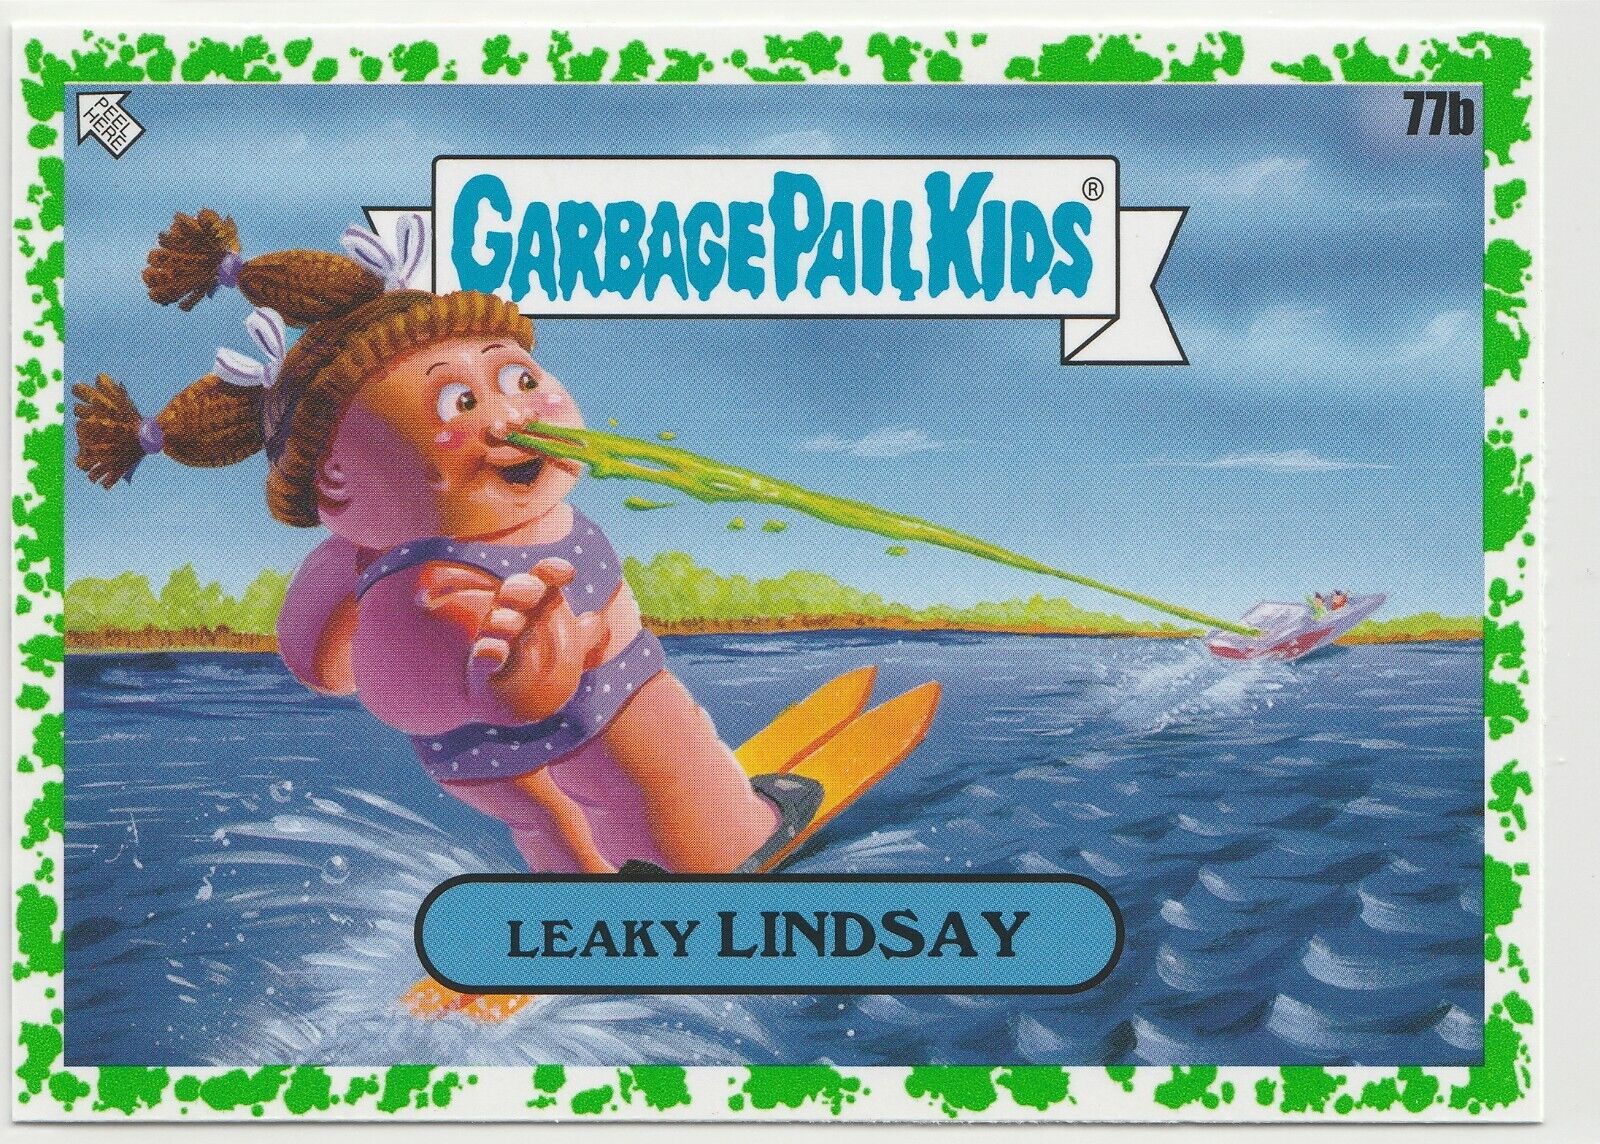 2021 Topps Garbage Pail Kids Go On Vacation Leaky Lindsay 77b GPK Green Border